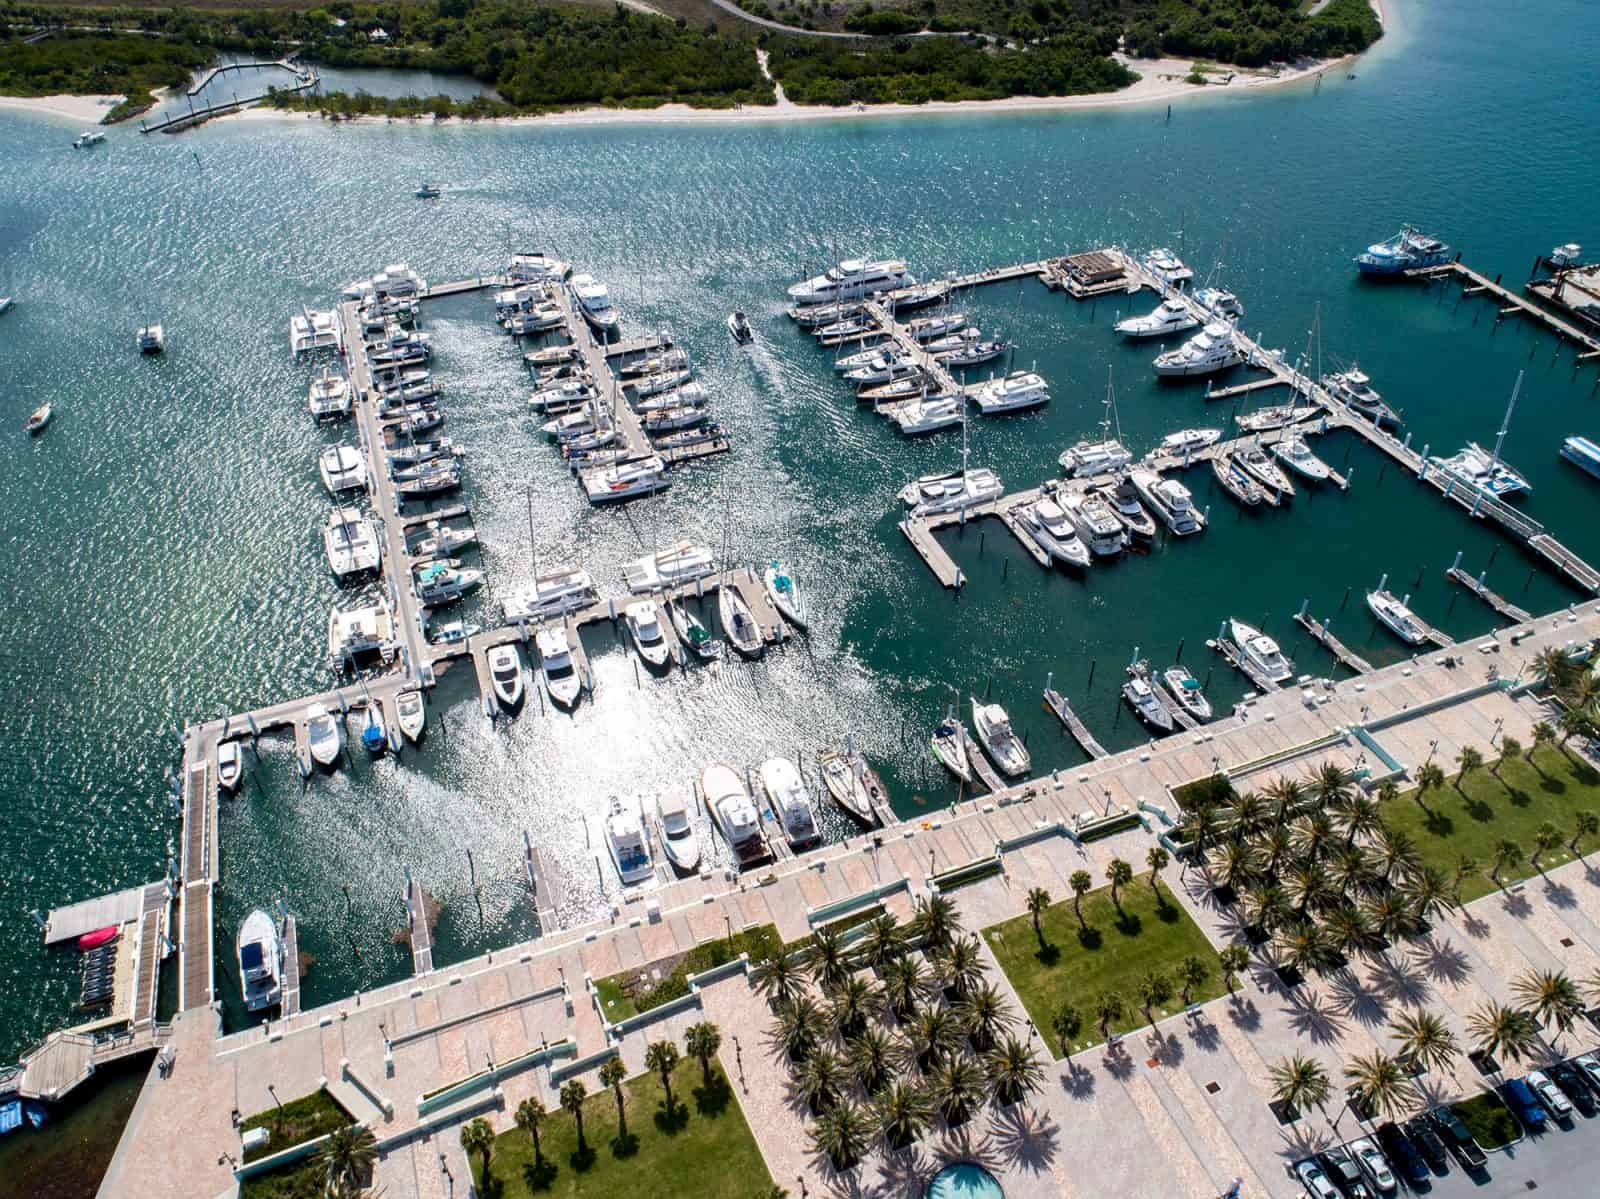 Drone Aerial Images of Boats in Marina in Riviera Beach, Florida